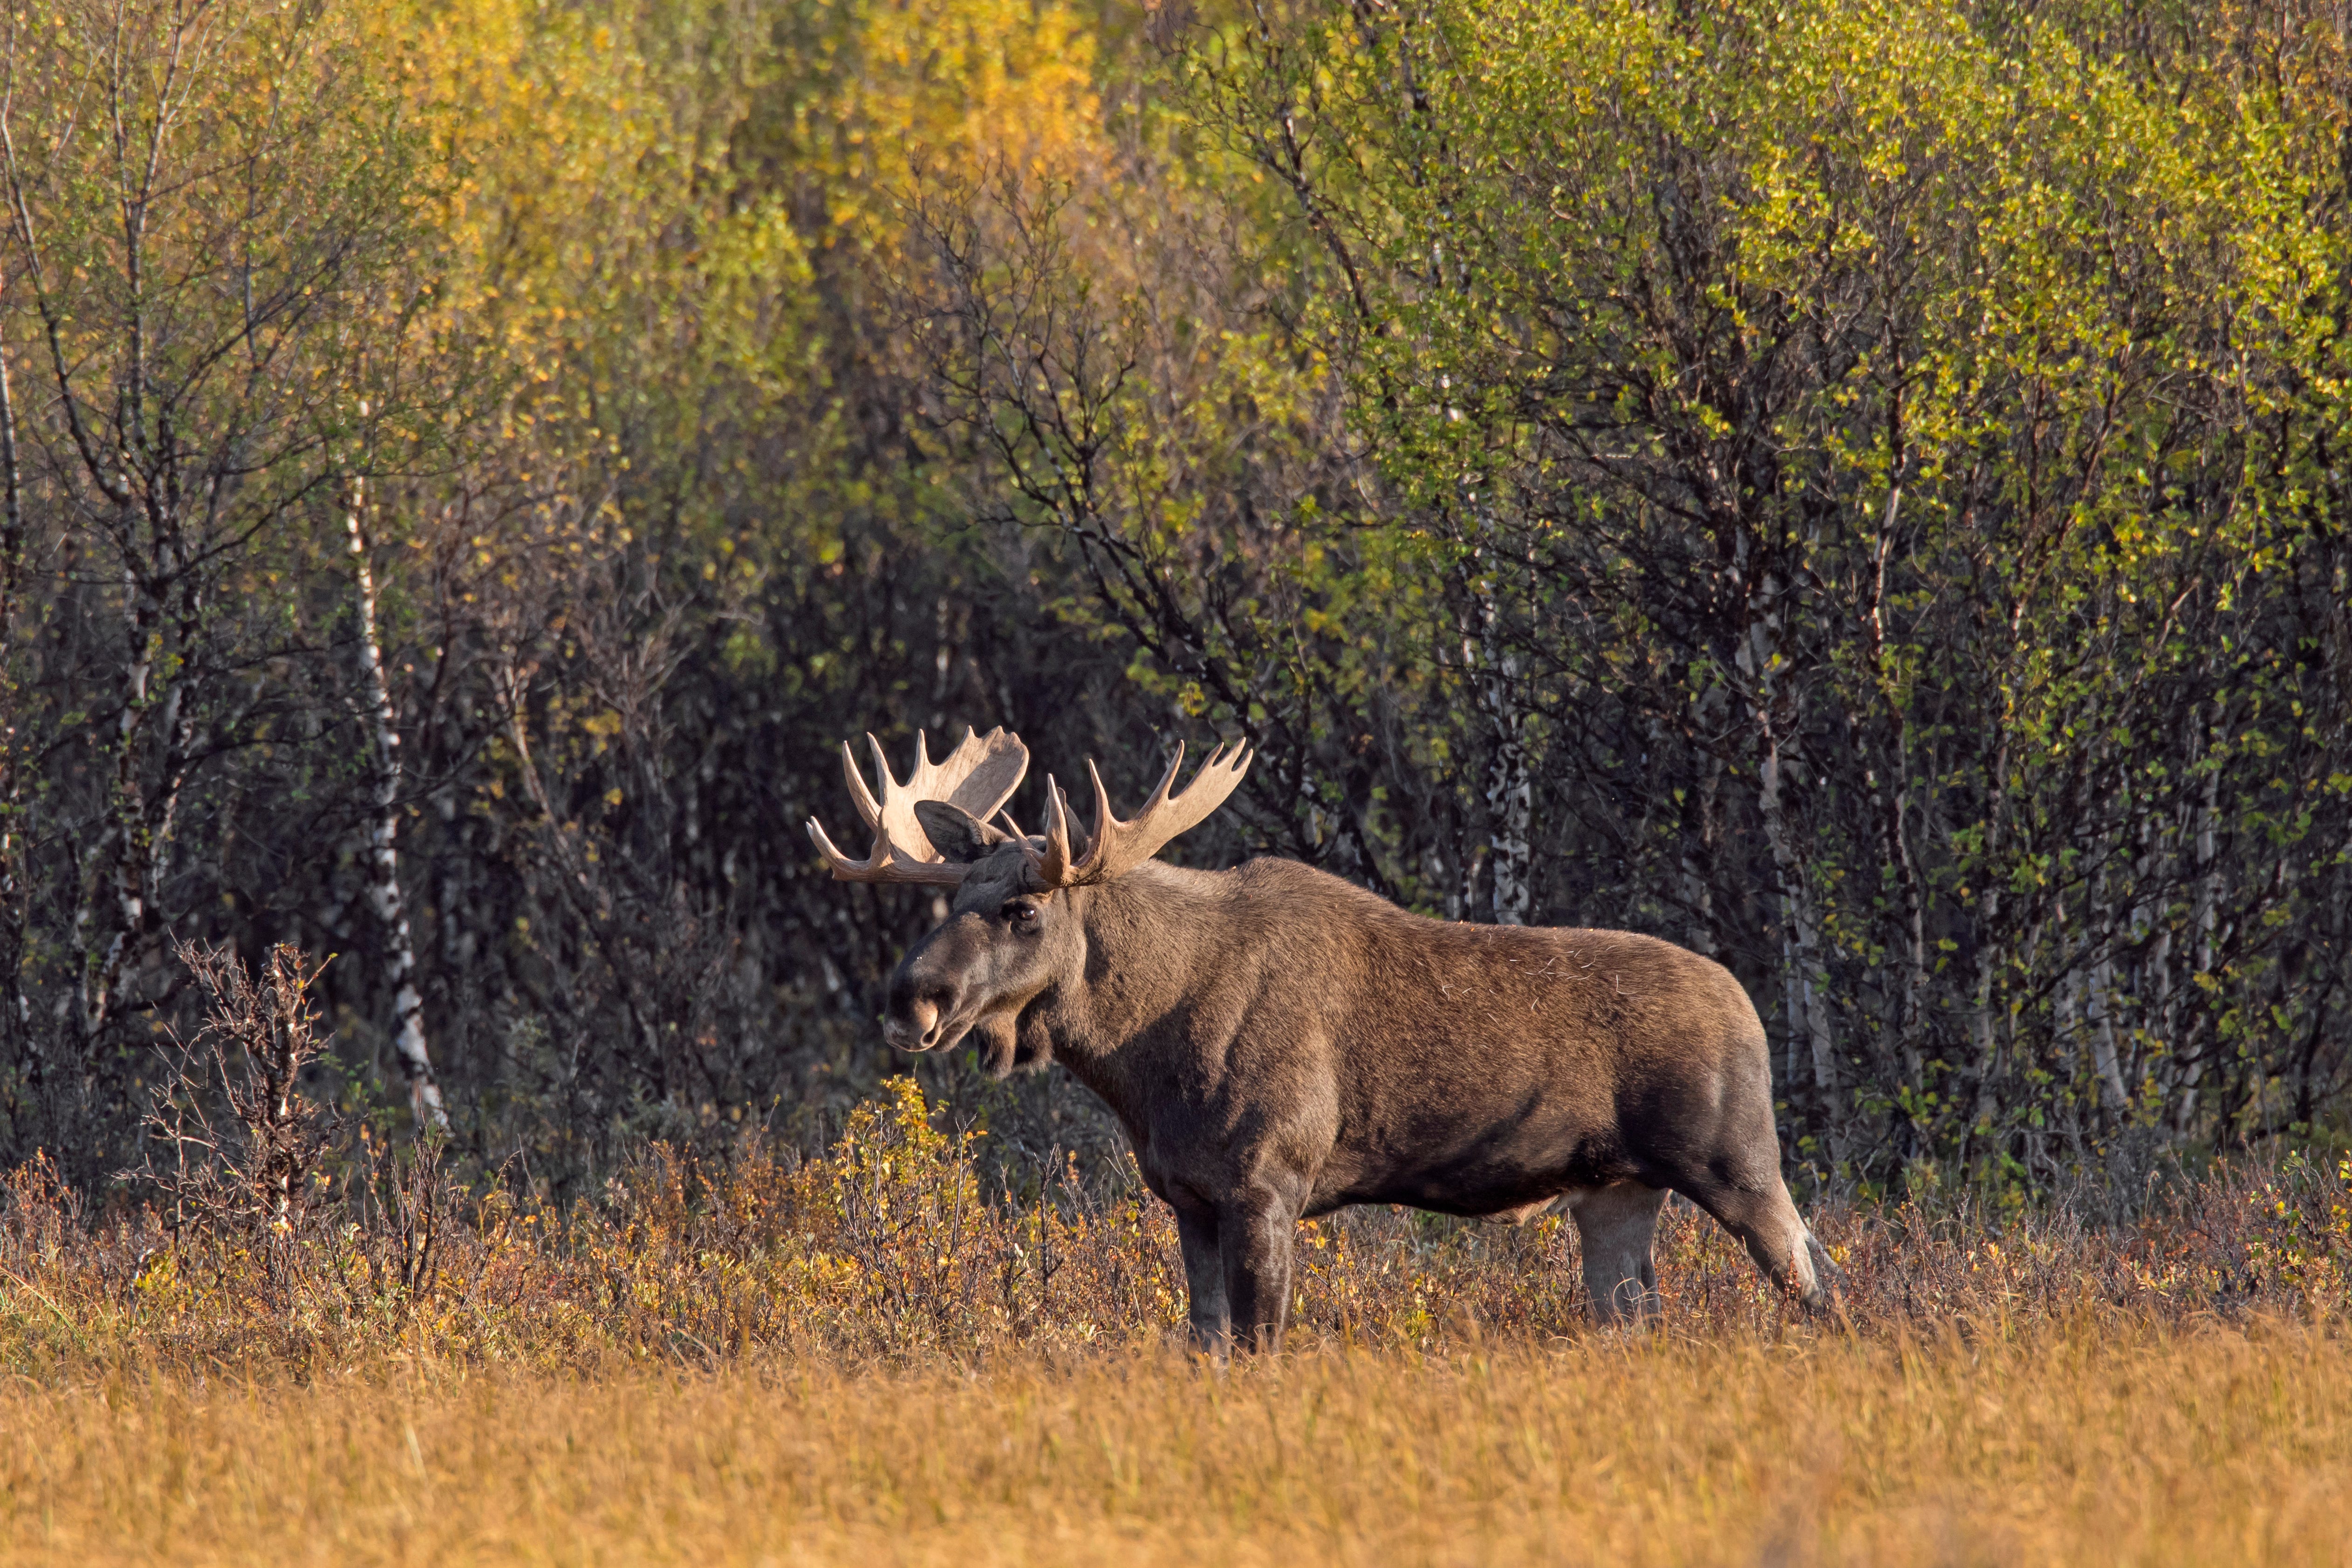 Moose (Alces alces) bull foraging in moorland with birch trees in autumn, Scandinavia.